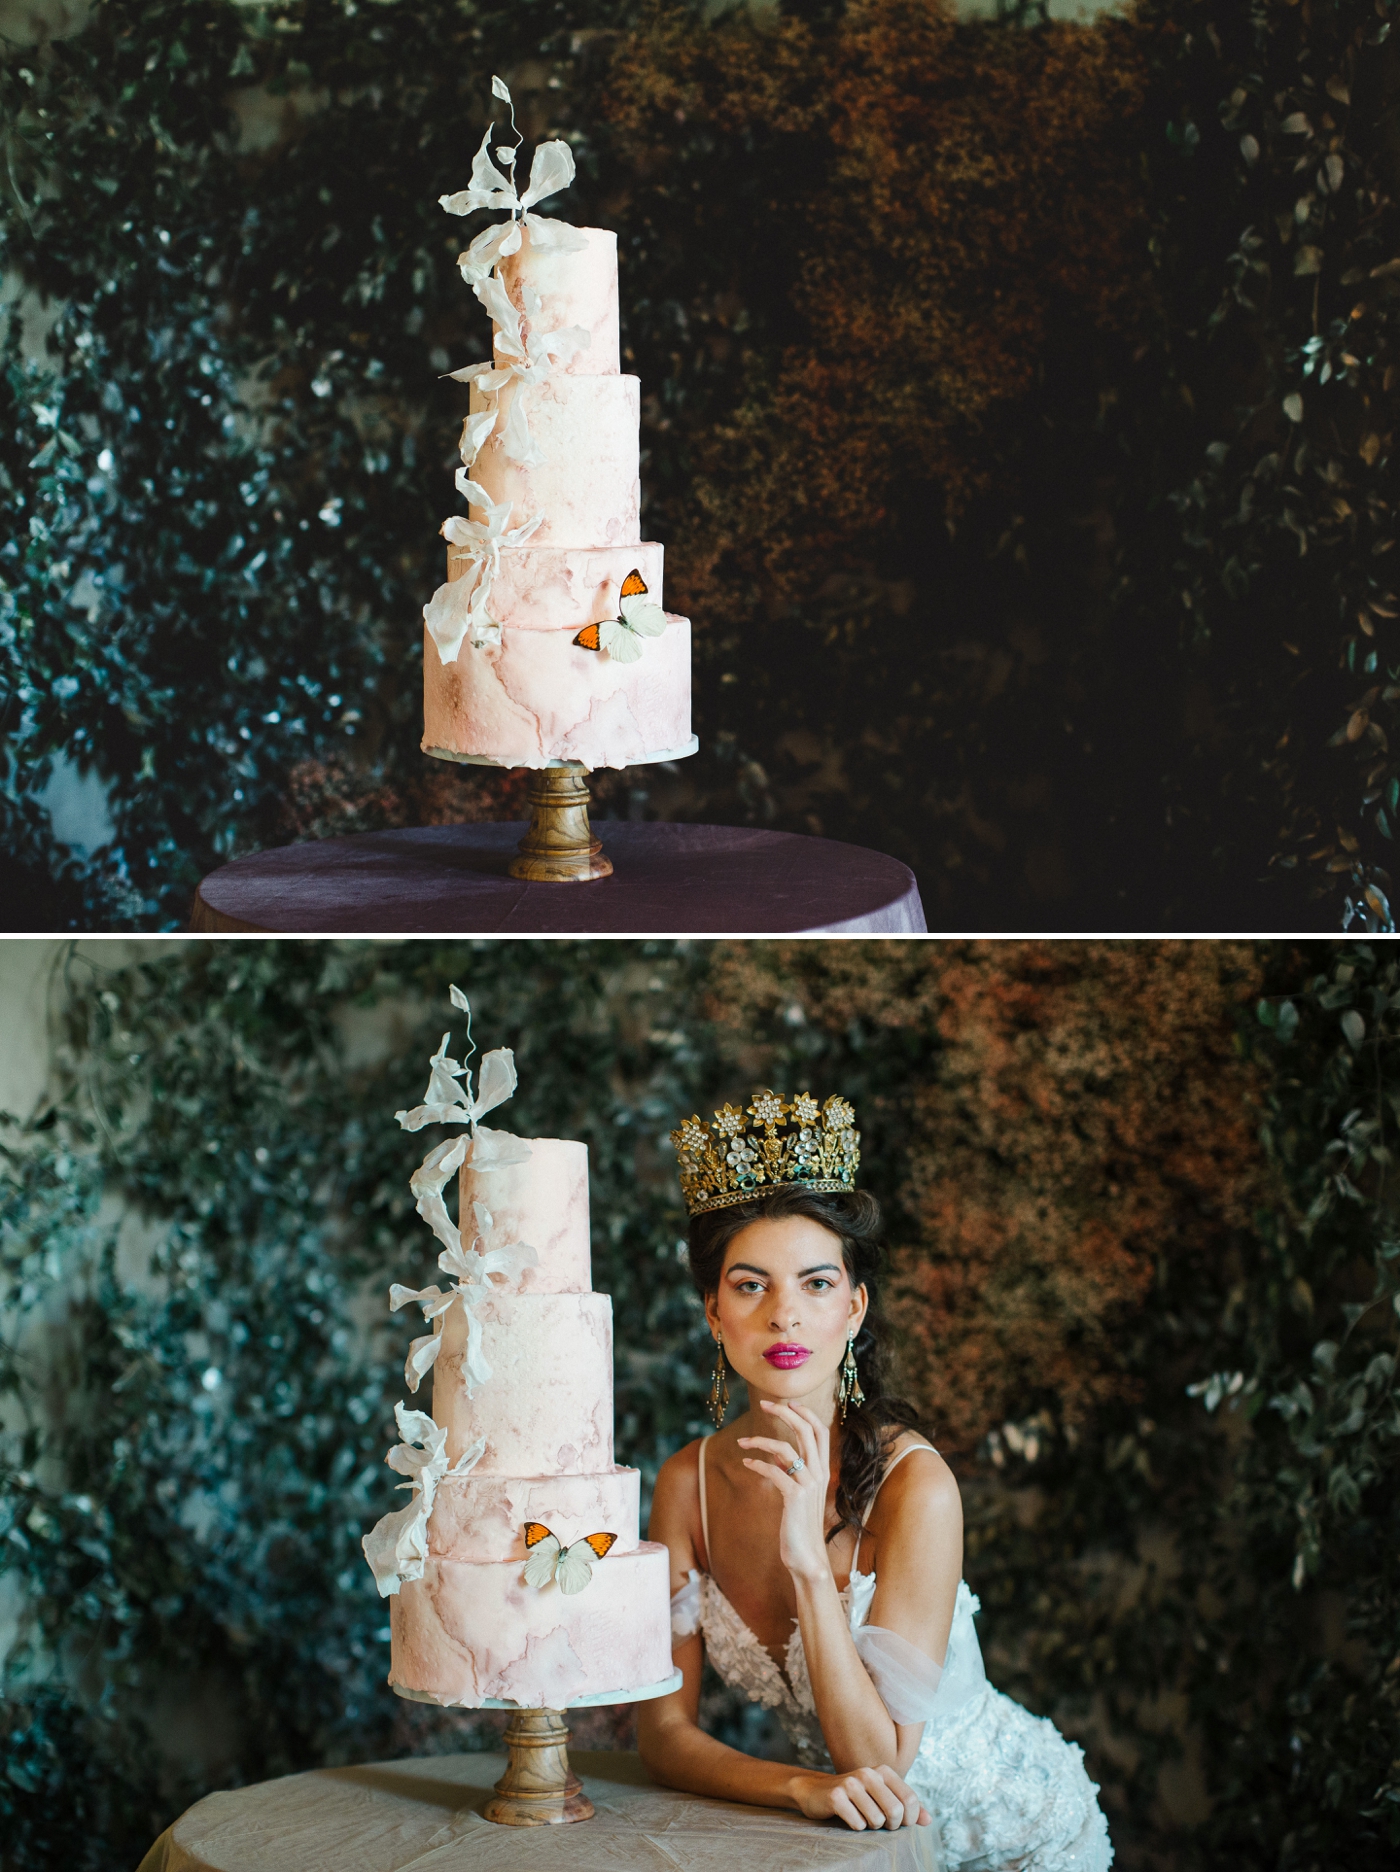 Blush and cream textured wedding cake with butterfly details by Vanilla And The Bean | Izzy and Co.